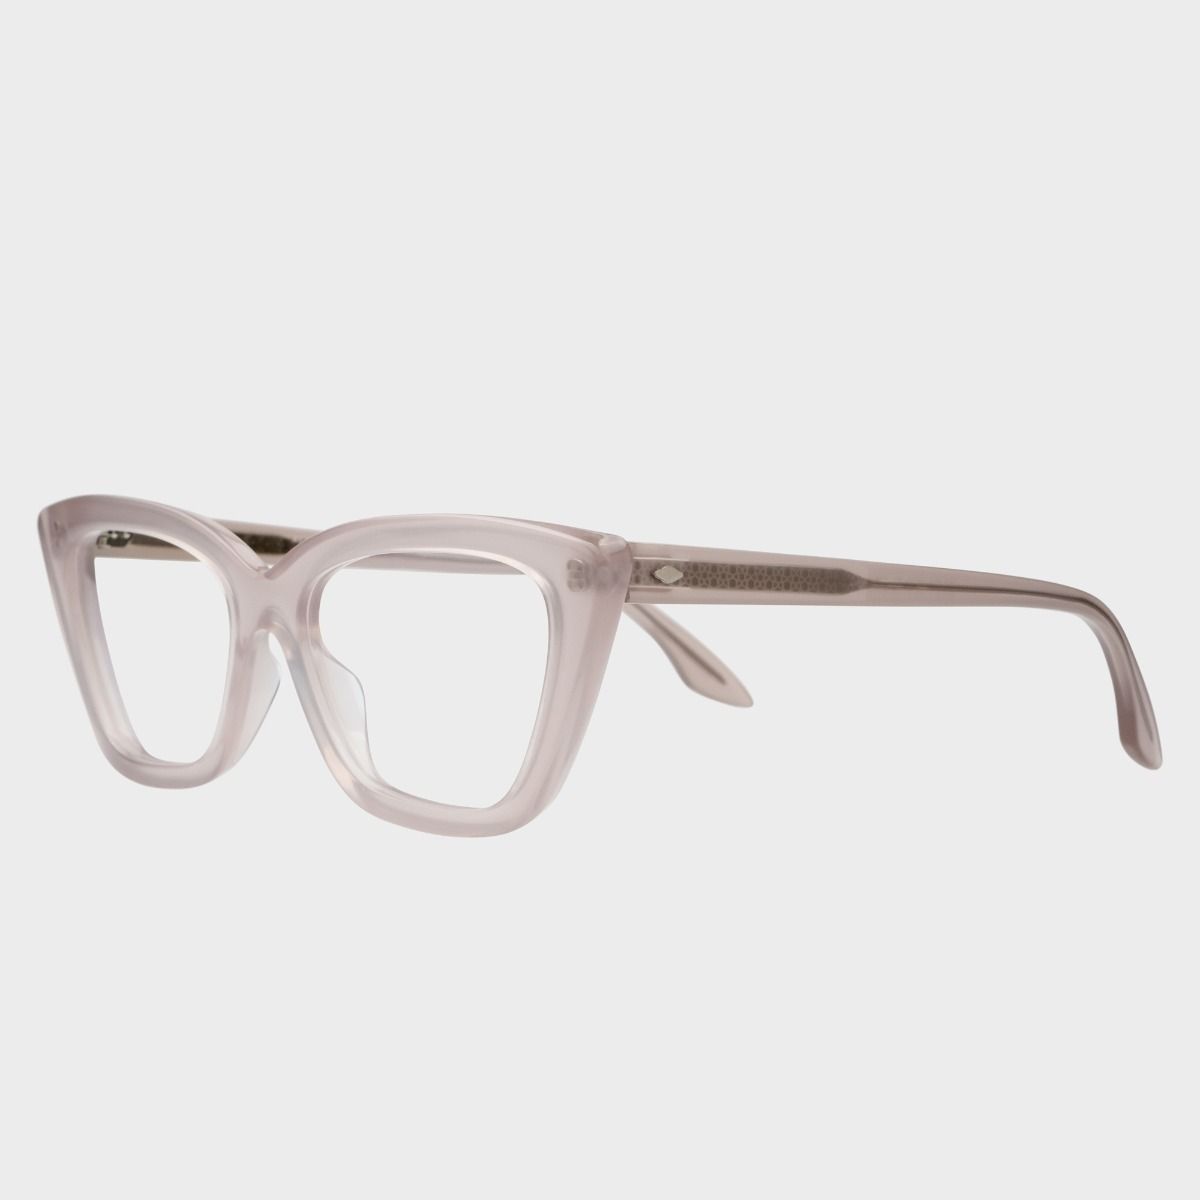 Cutler and Gross, 1241 Optical Cat-Eye Glasses - Prawn Cocktail